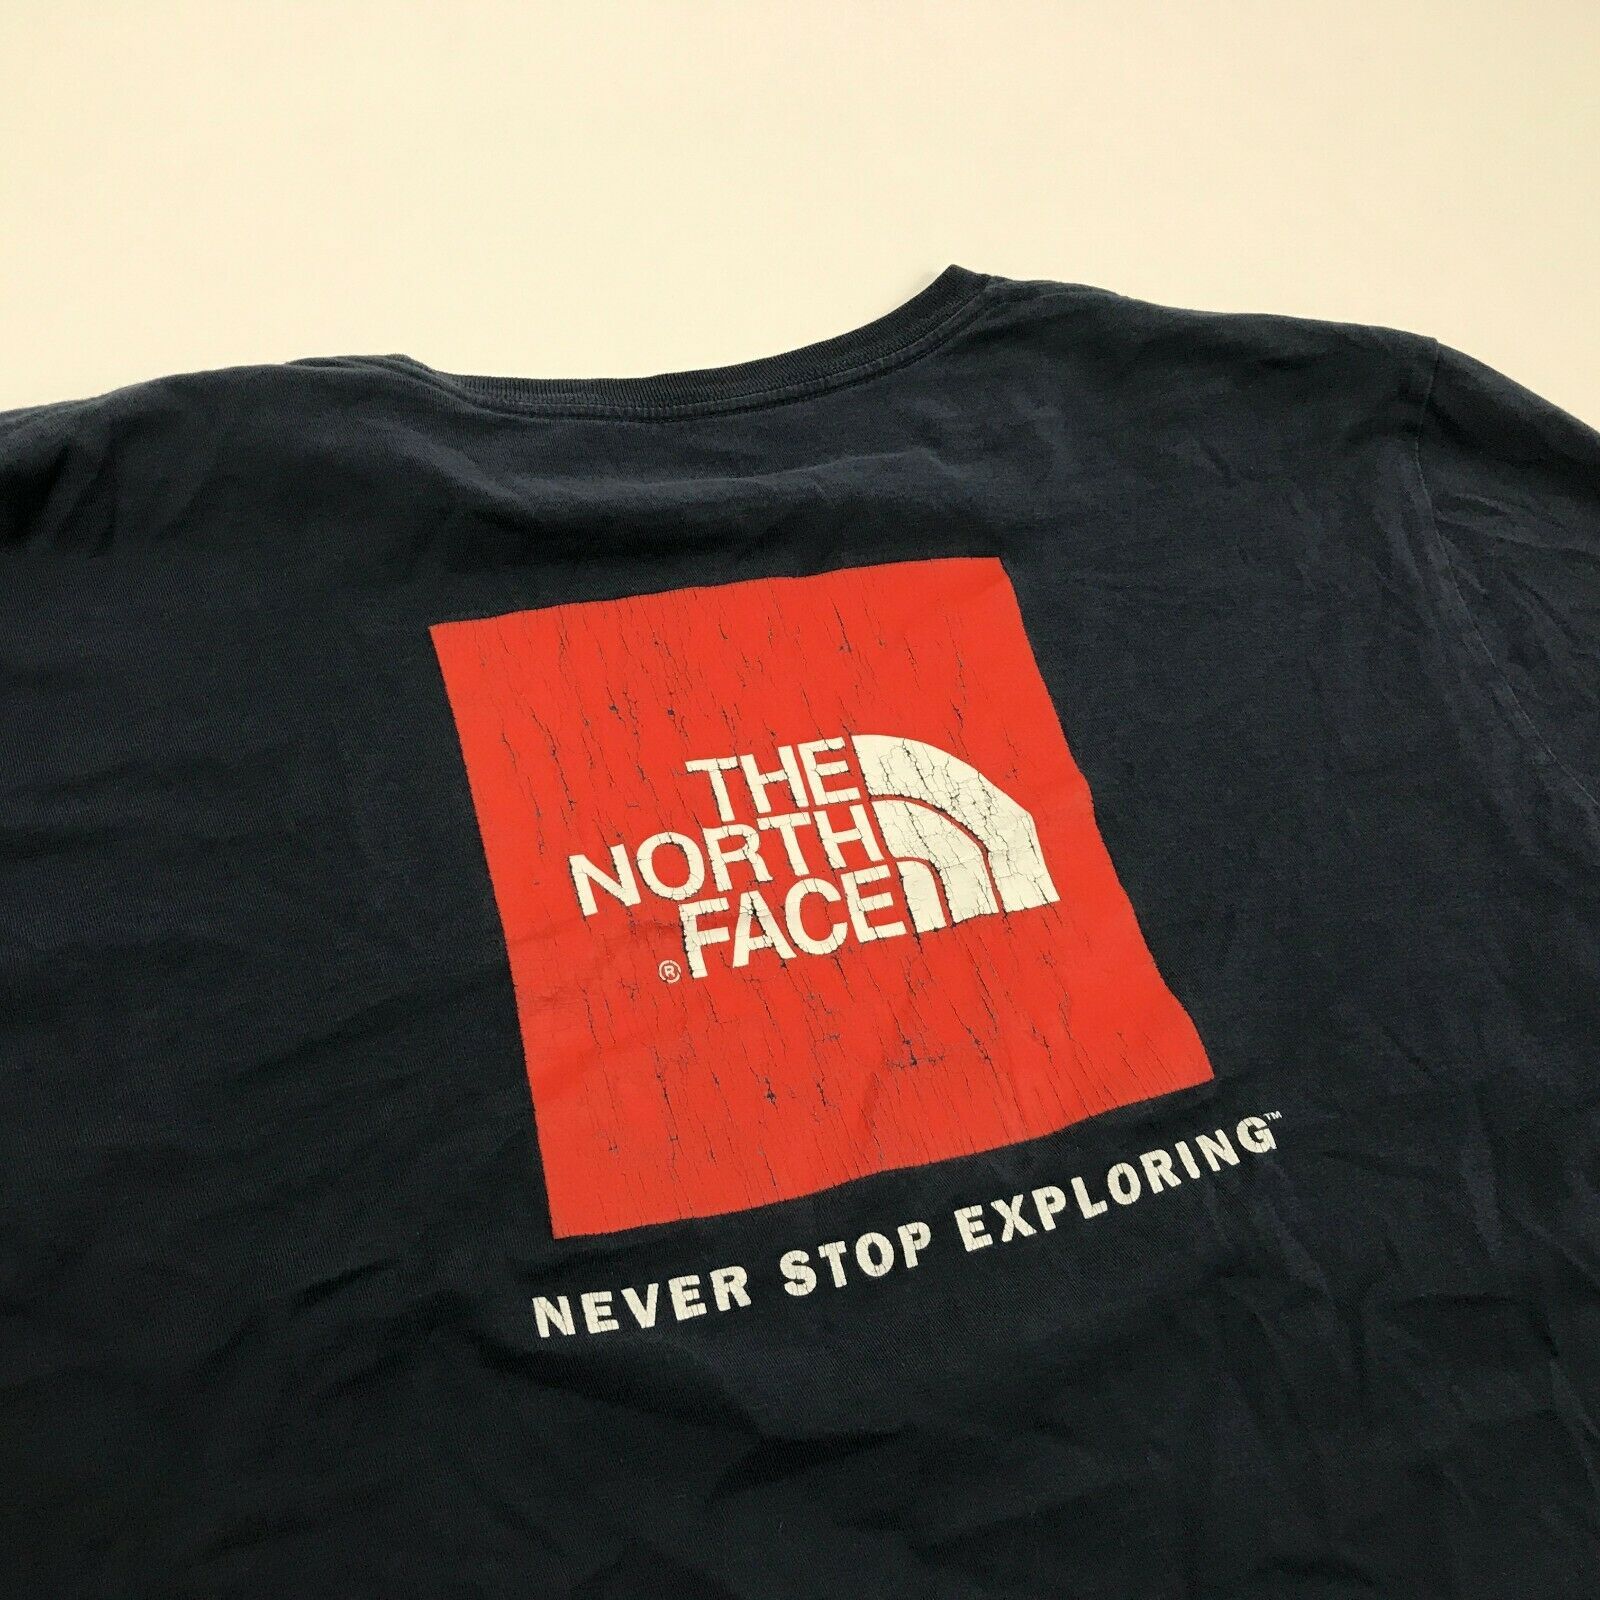 The North Face A5 Series Long Sleev Shirt Size M Hiking Tee NEVER STOP ...